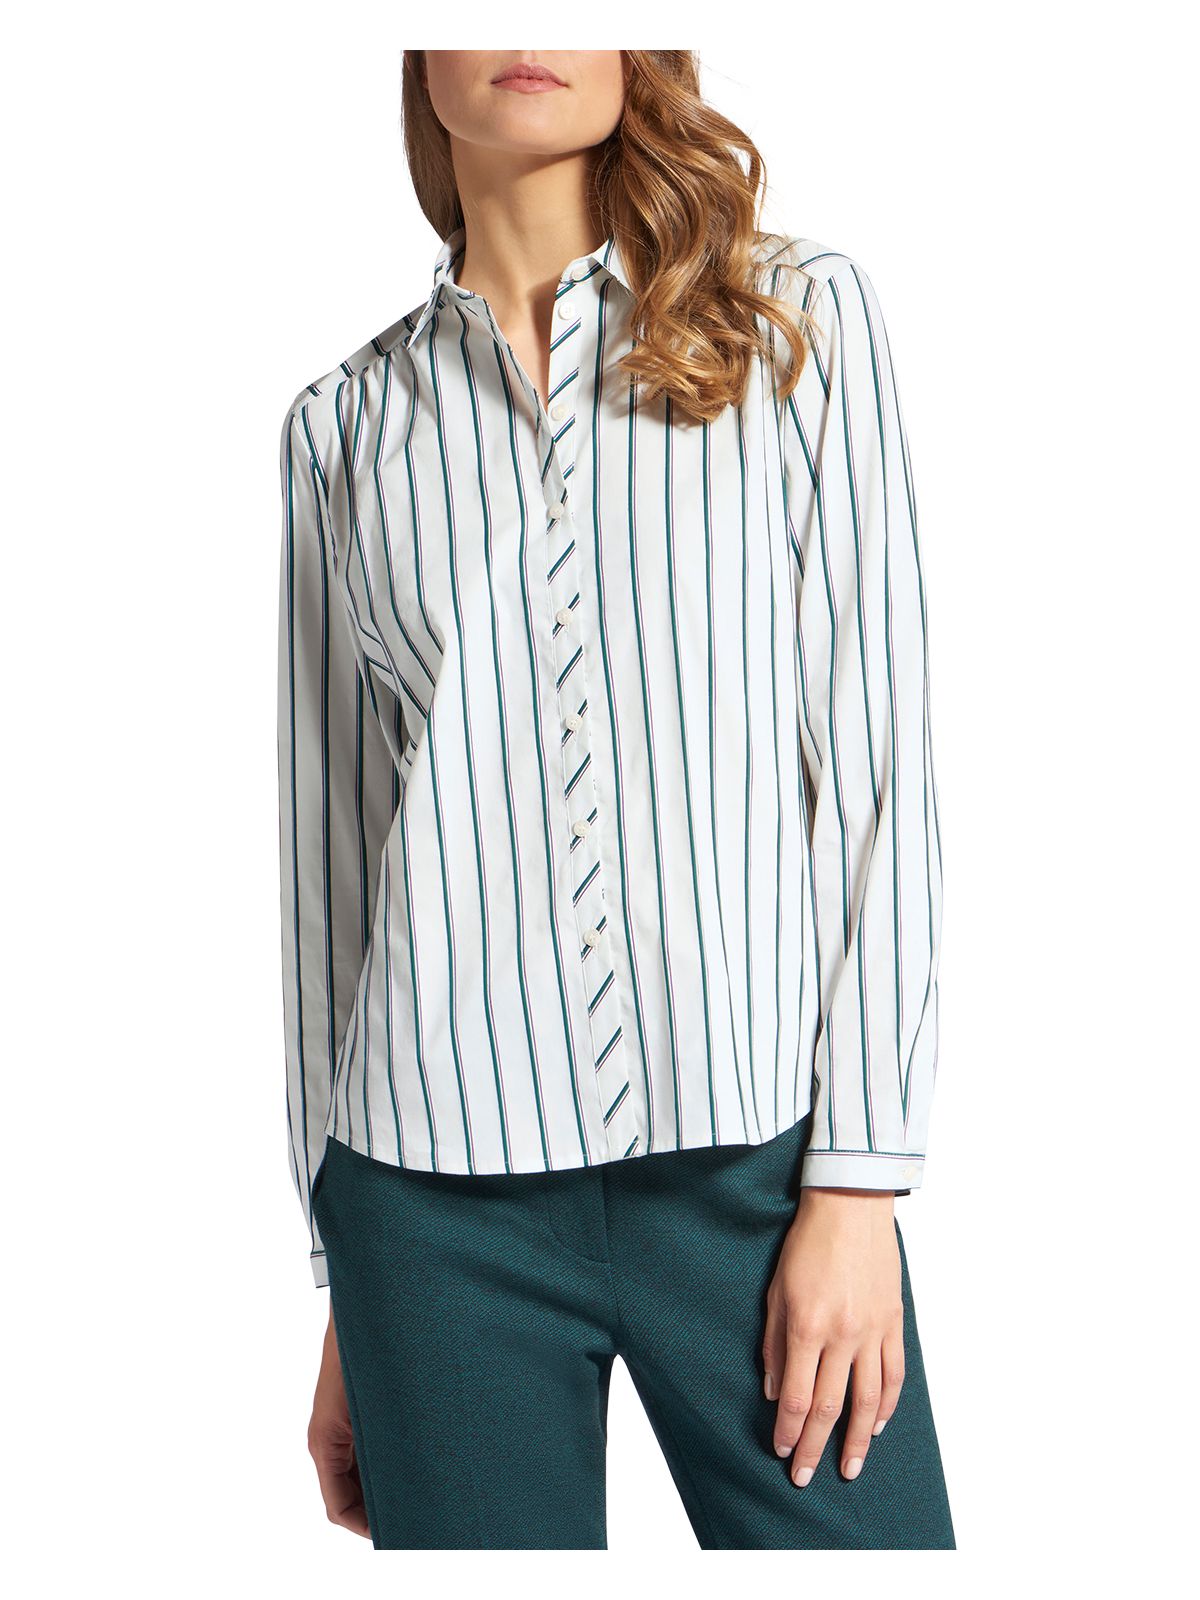 BASLER Womens White Striped Cuffed Collared Button Up Top 22